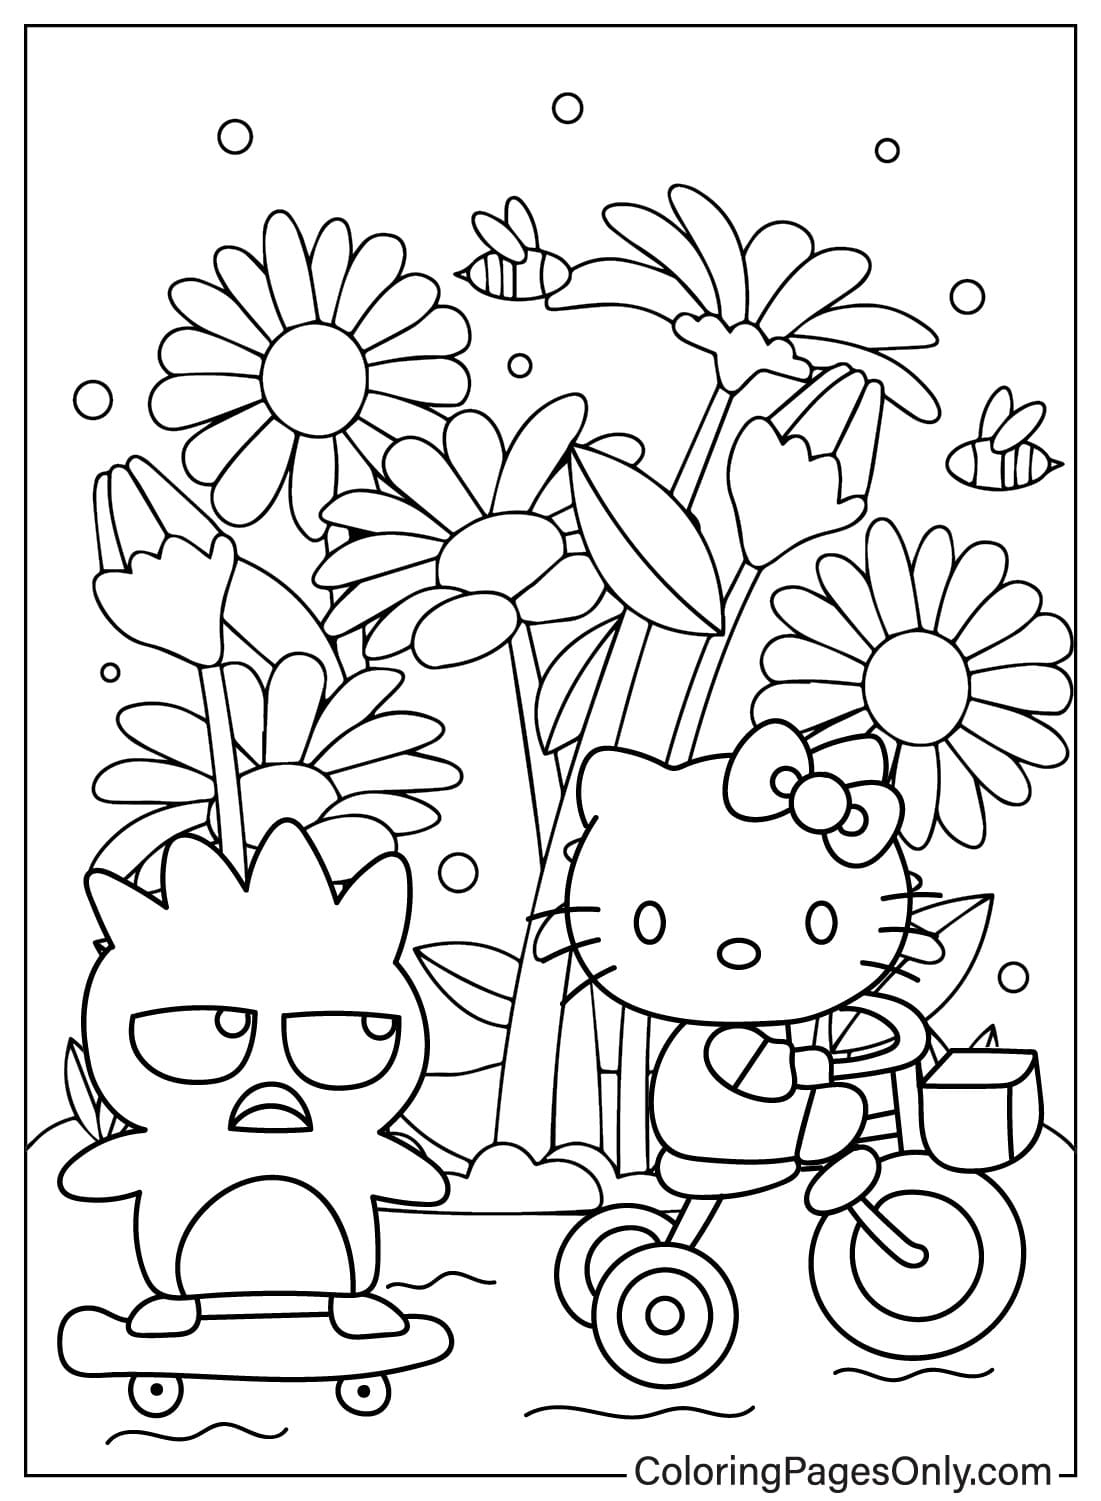 Badtz-Maru and Hello Kitty Coloring Page Coloring Page